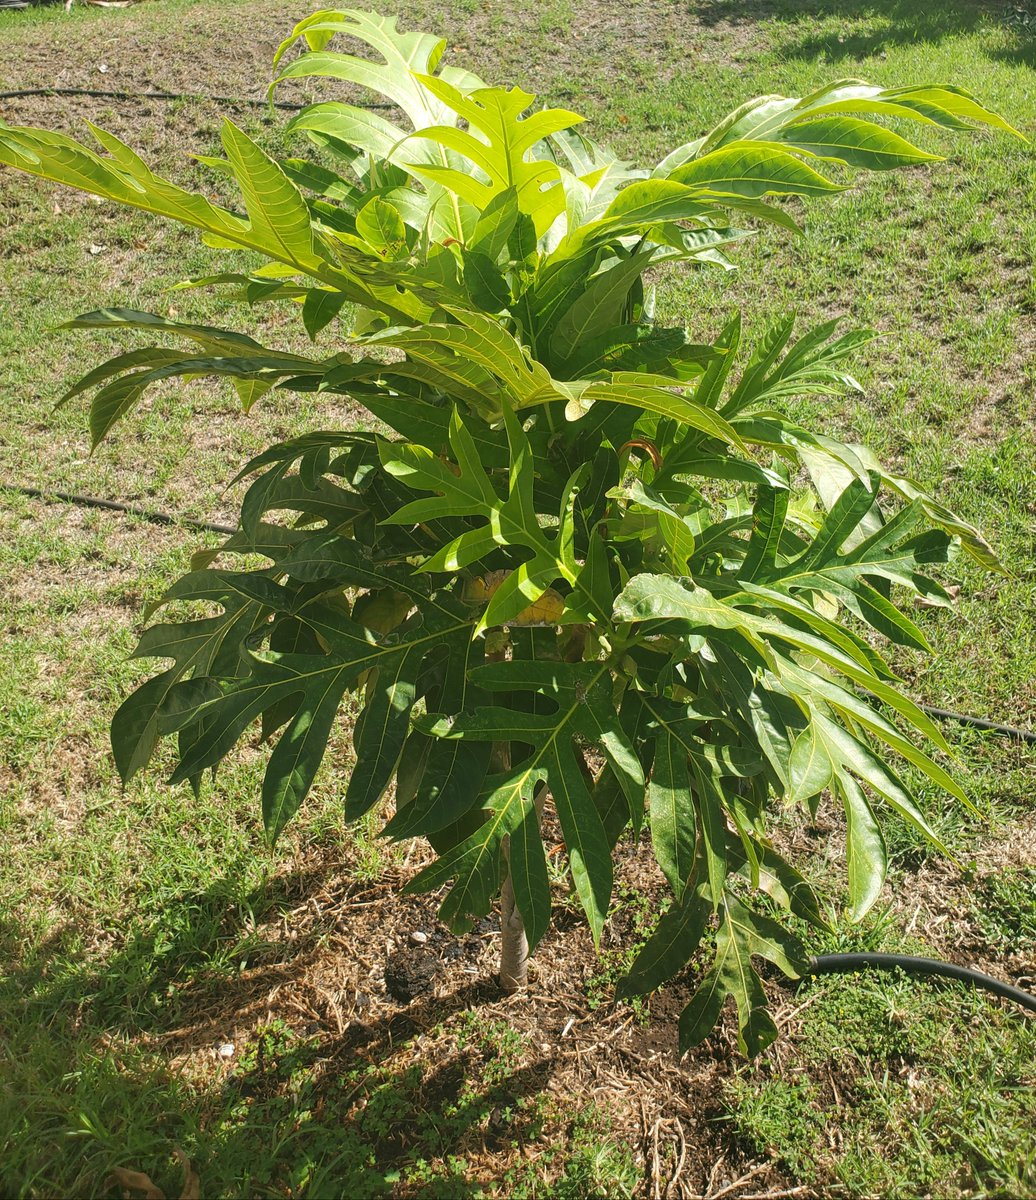 Encouraged by the quick growth of this Ulu (breadfruit) tree. If every yard in Hawaii had one of these we would all be better-off! #ulu #breadfruit #otea #foodindependence